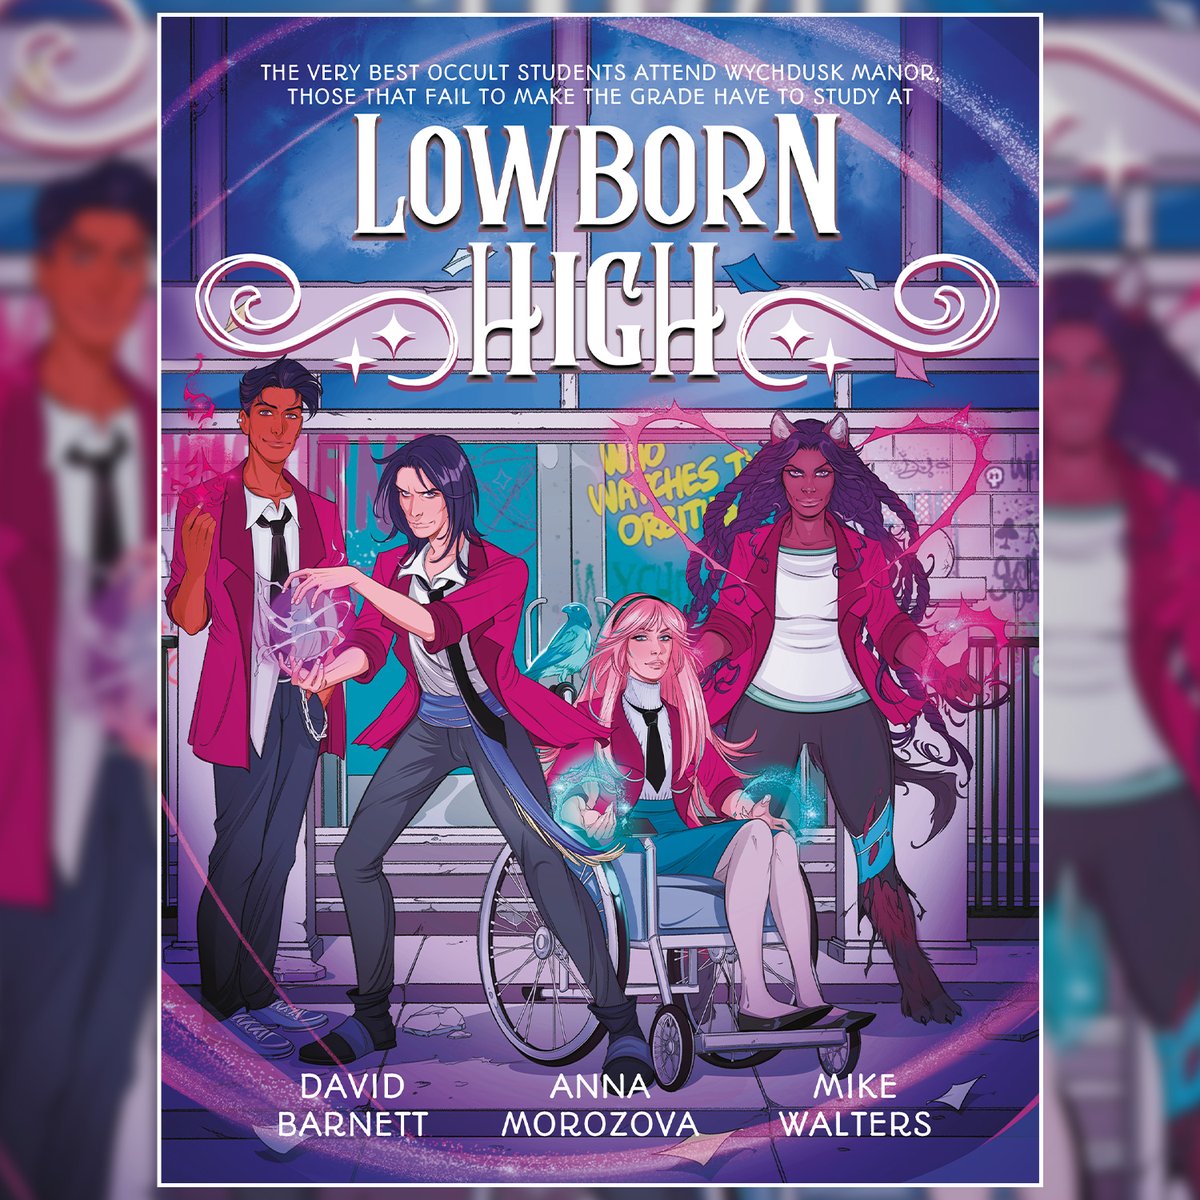 MEGA-INTERVIEW! With the Lowborn High collection out today, @ziggystarlog at @TheComicon spoke to @davidmbarnett and @_annamorozova about their magical all-ages adventure series! Check out the full interview here: bit.ly/4d8Y81H